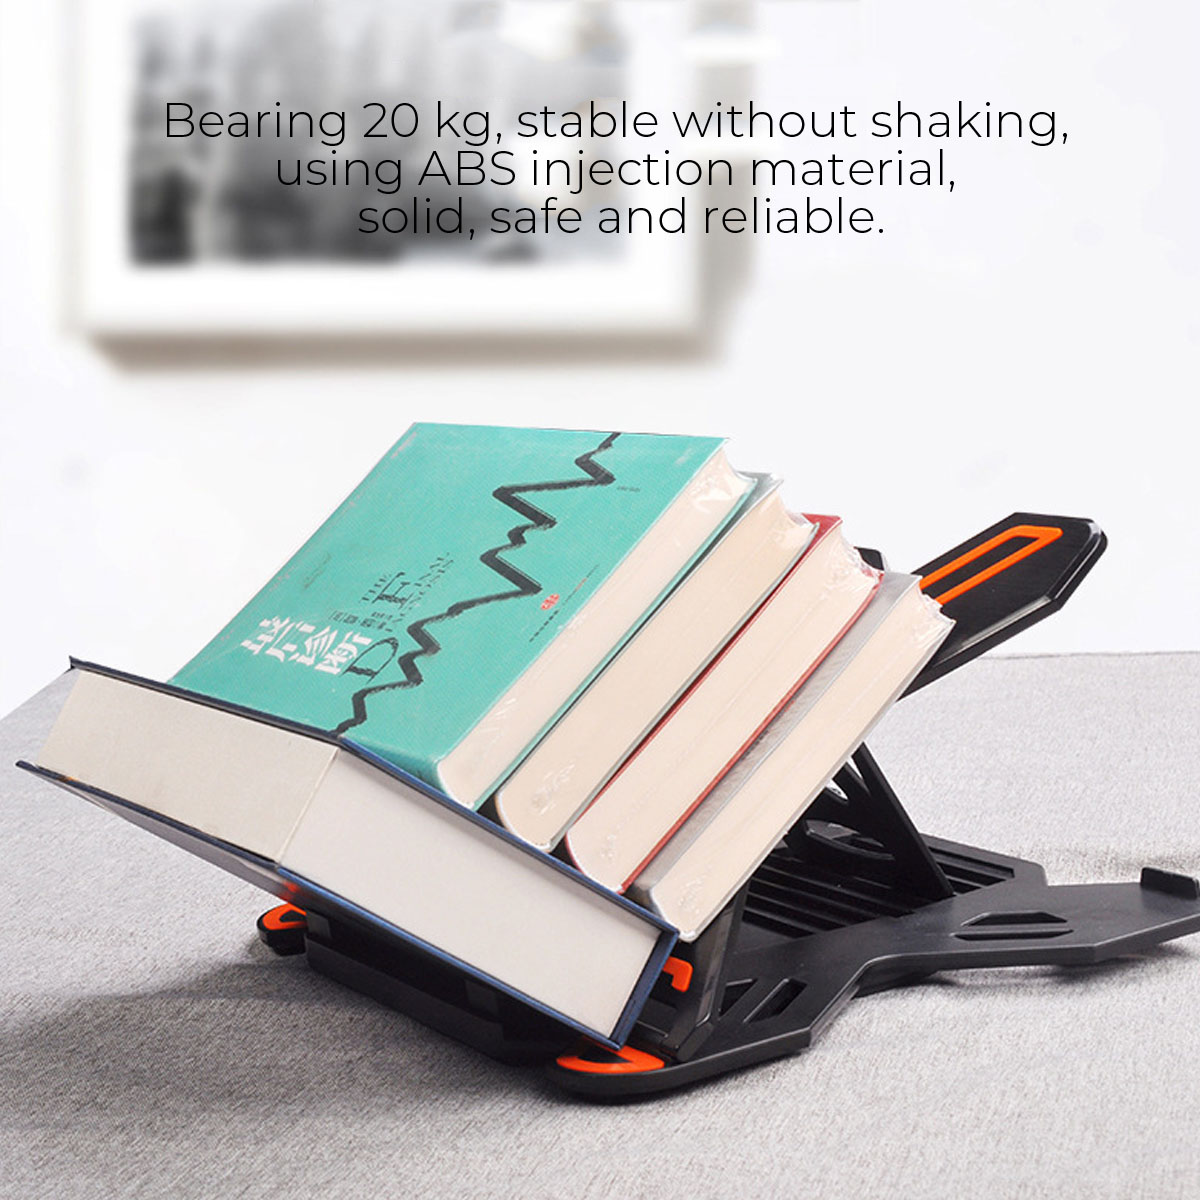 2 IN 1 Foldable 8-Level Height Adjustable Macboo/ Laptop Holder Stand Bracket with Phone Holder